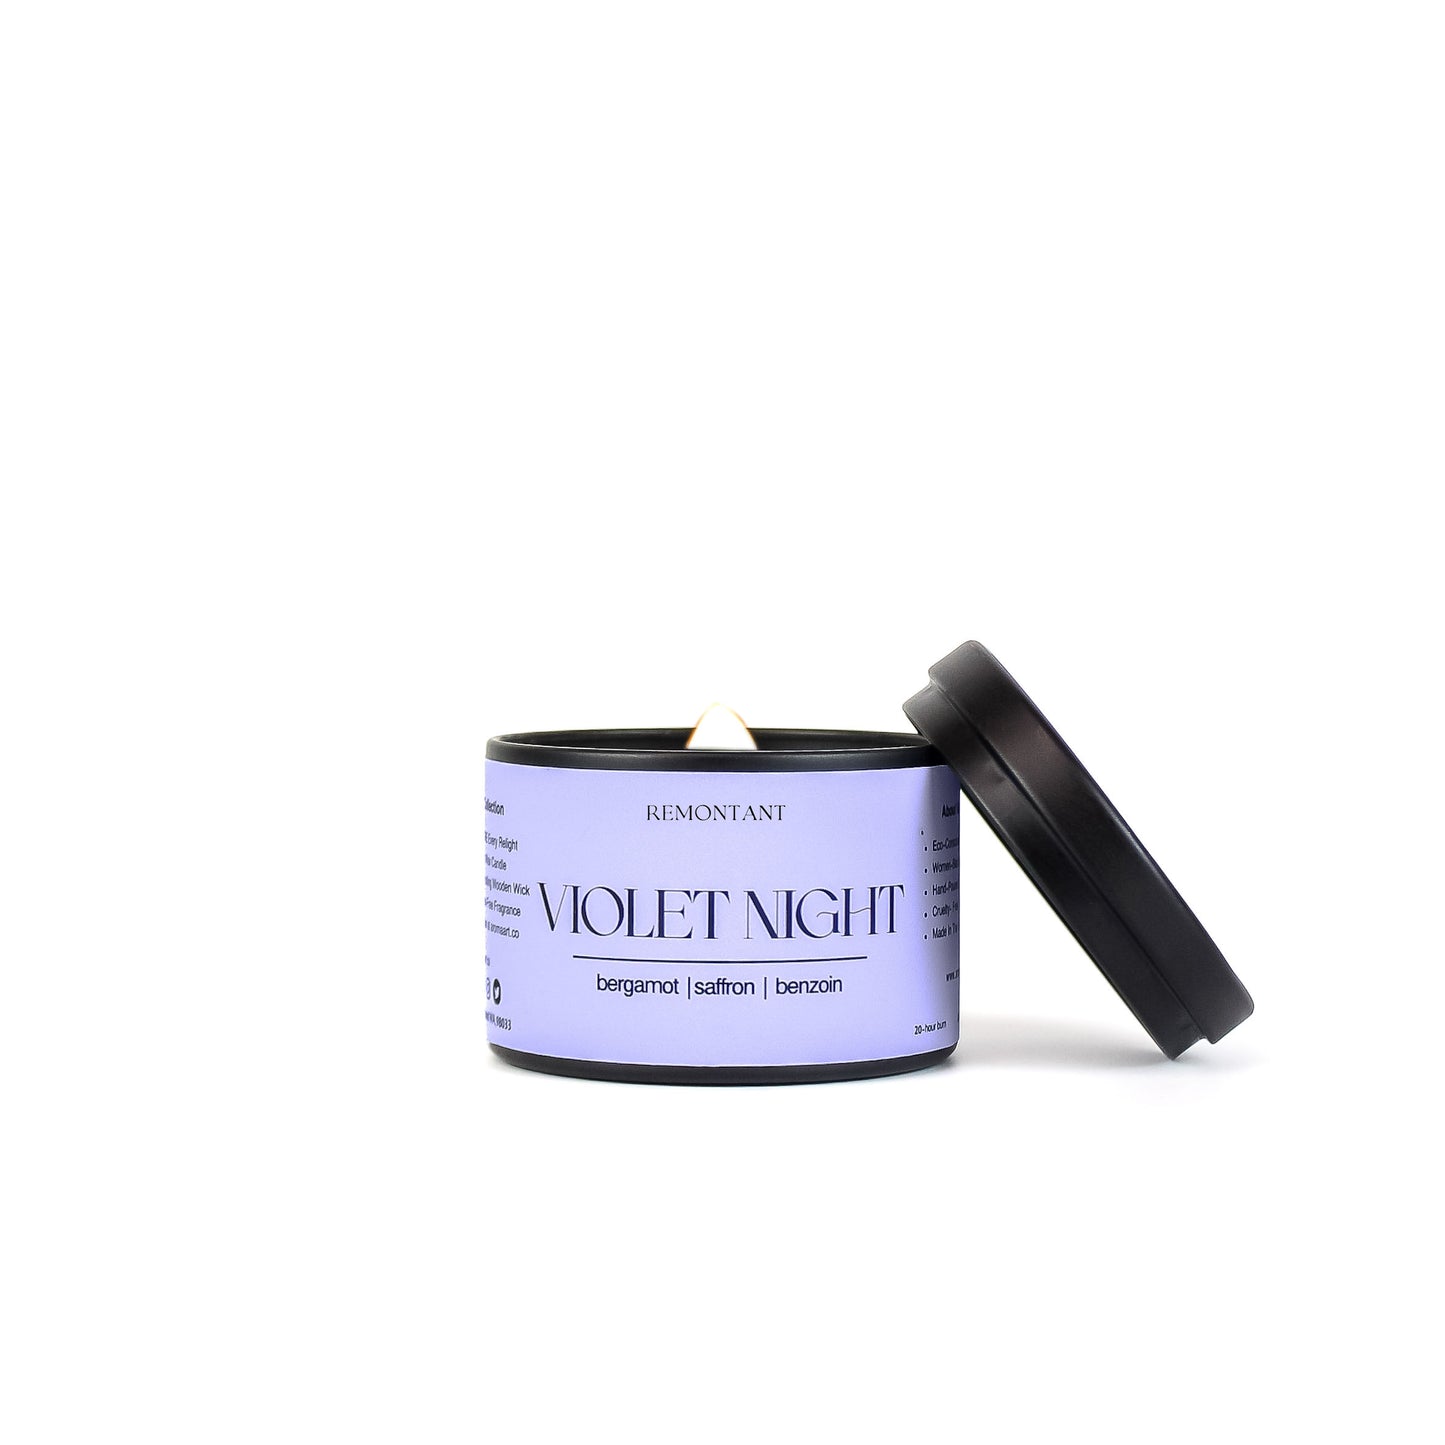 Violet Night Travel Sized Candle Tin